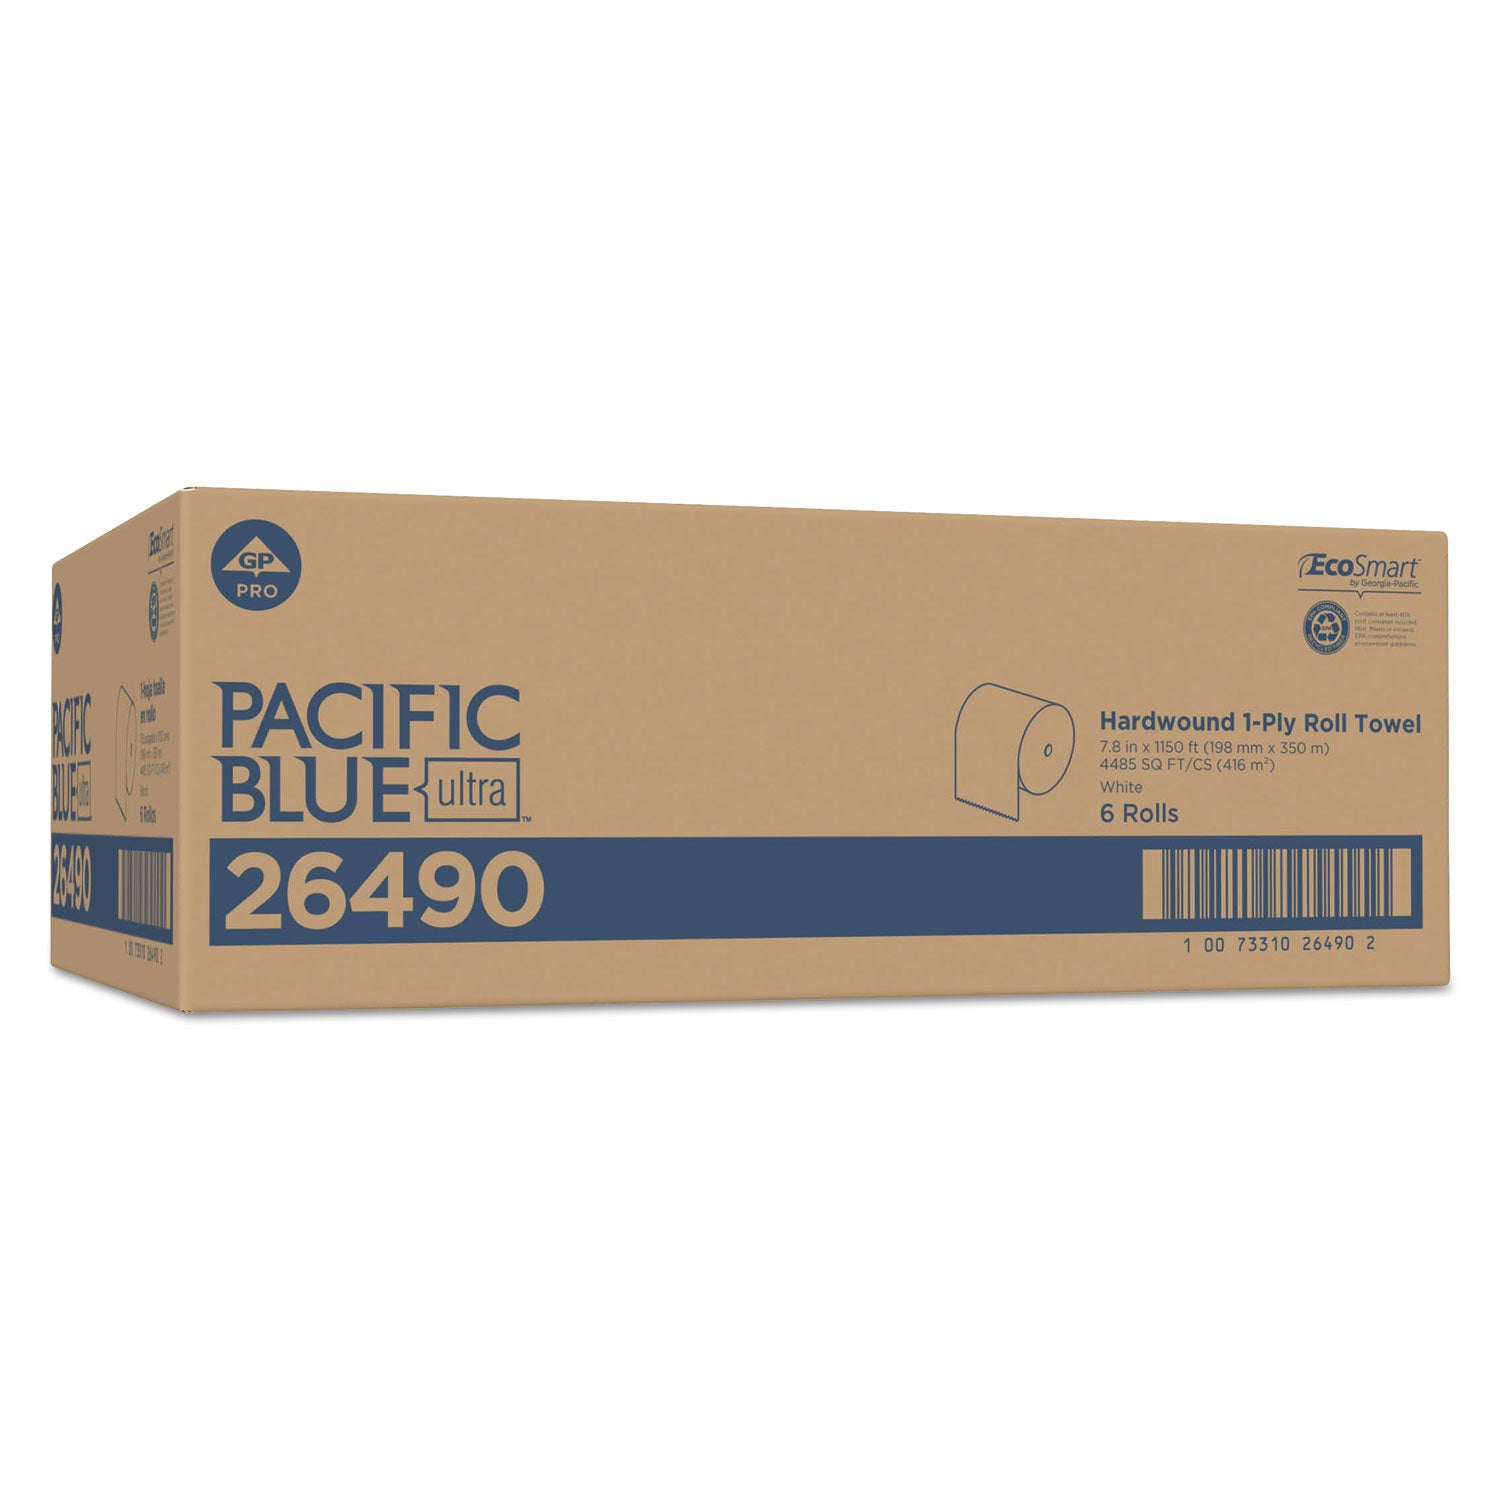 pacific-blue-ultra-paper-towels-1-ply-787-x-1150-ft-white-6-rolls-carton_gpc26490 - 3